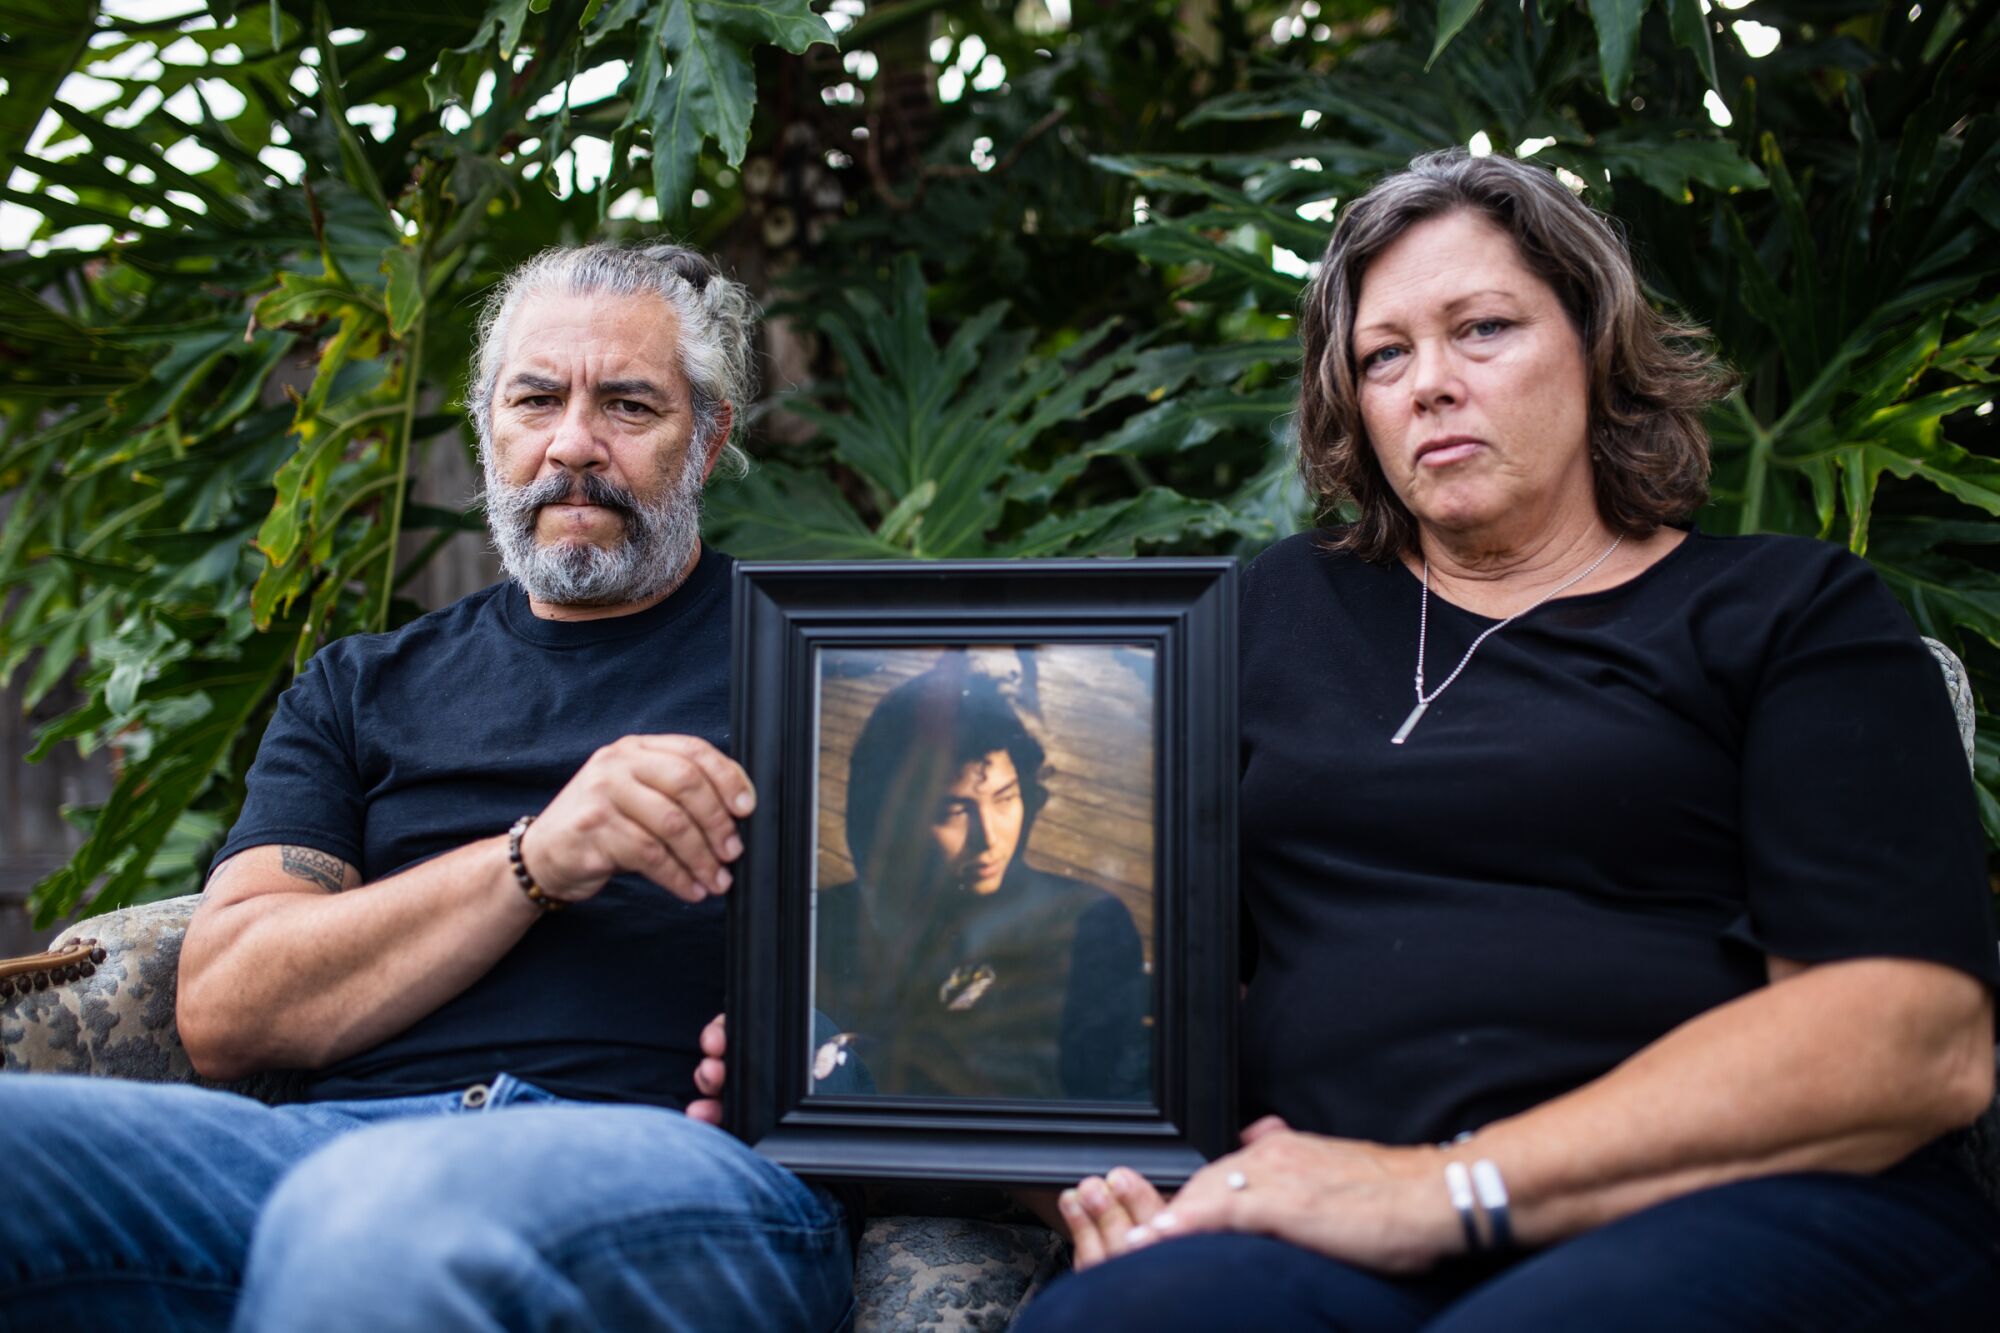 Antonio and Lisa Nava pose with a photograph of their 24-year-old-son, Alex Nava, who passed away from drug overdose